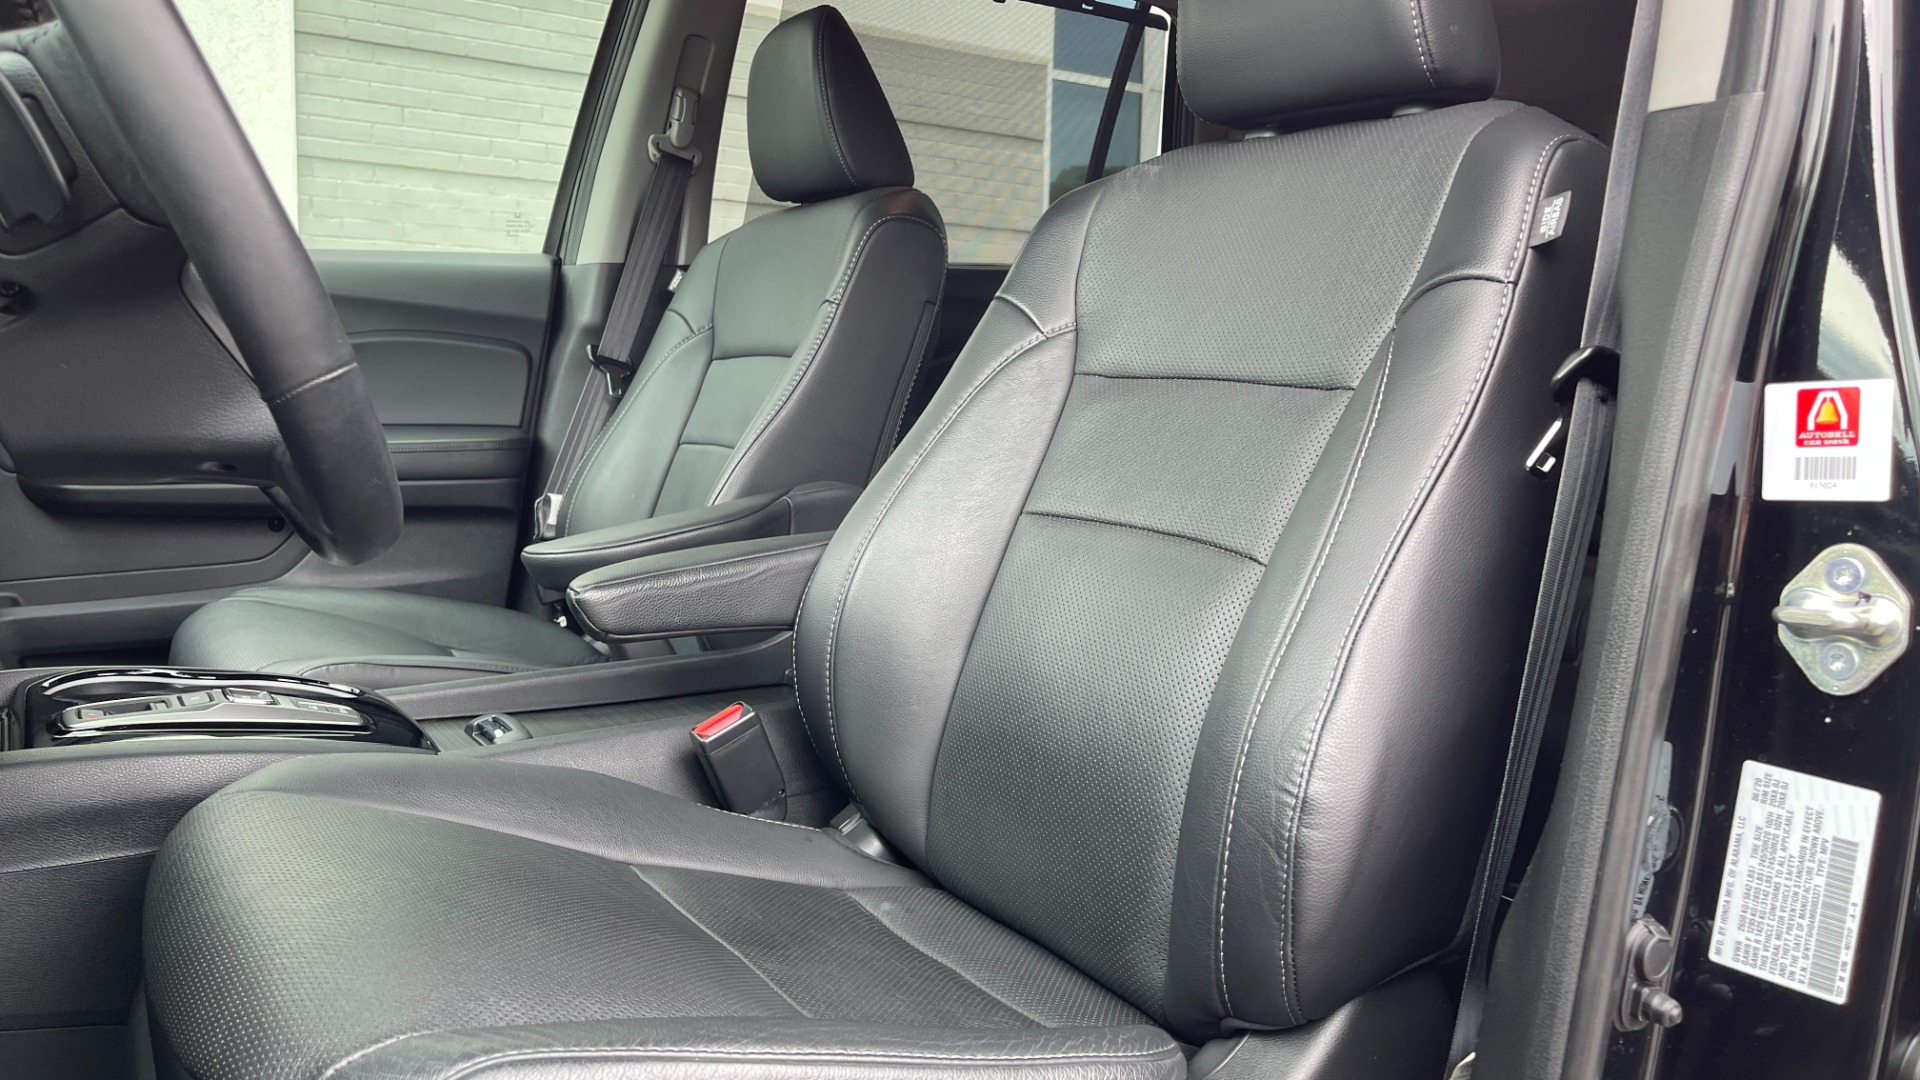 Used 2021 Honda Pilot ELITE / DVD SYSTEM / 3RD ROW / CAPTAINS CHAIRS / LEATHER for sale $42,995 at Formula Imports in Charlotte NC 28227 18